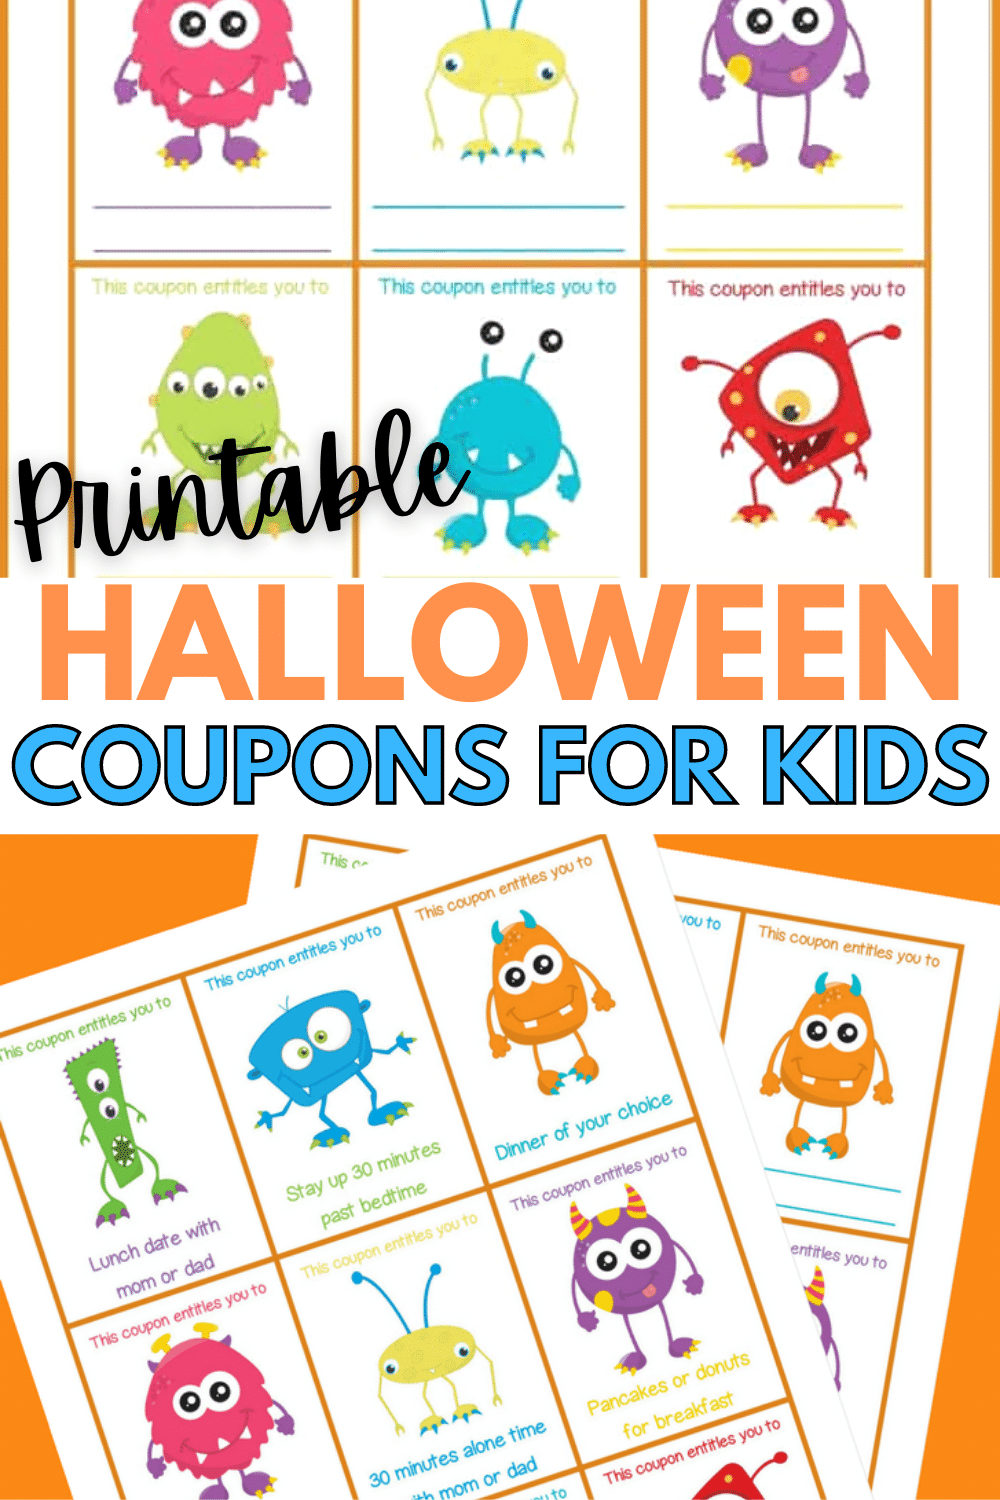 These printable Halloween coupons for kids make a fun non-candy treat for kids and are also a great way to get them to voluntarily give up candy. #printables #freeprintables #halloweenprintables #halloweencoupons #couponprintables via @wondermomwannab